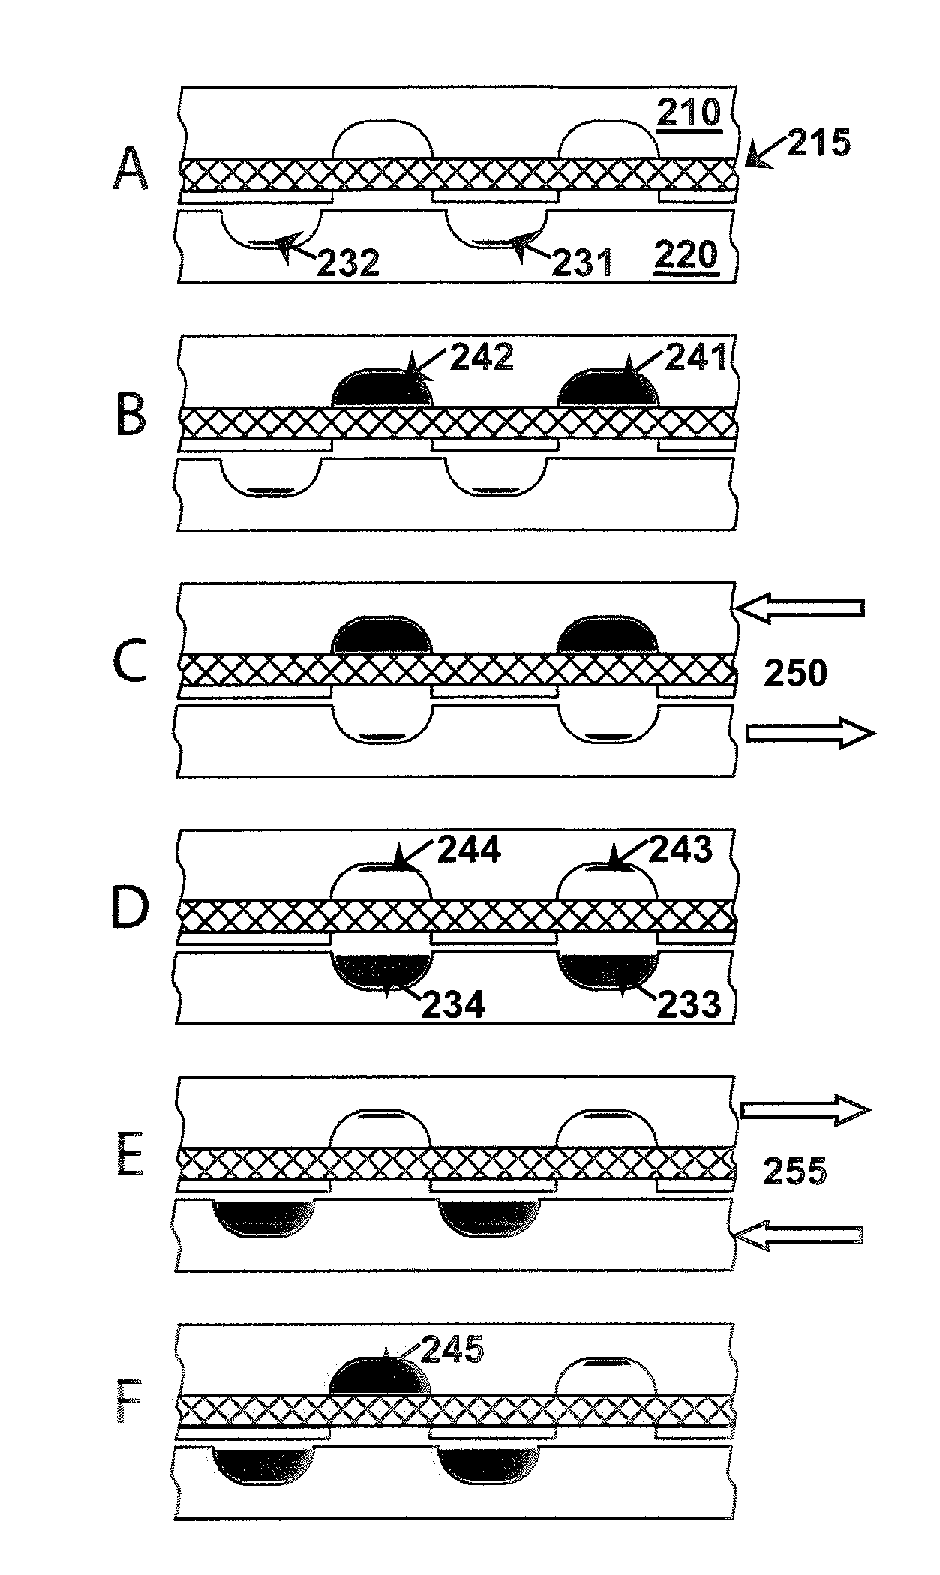 Fluidic devices and systems for sample preparation or autonomous analysis